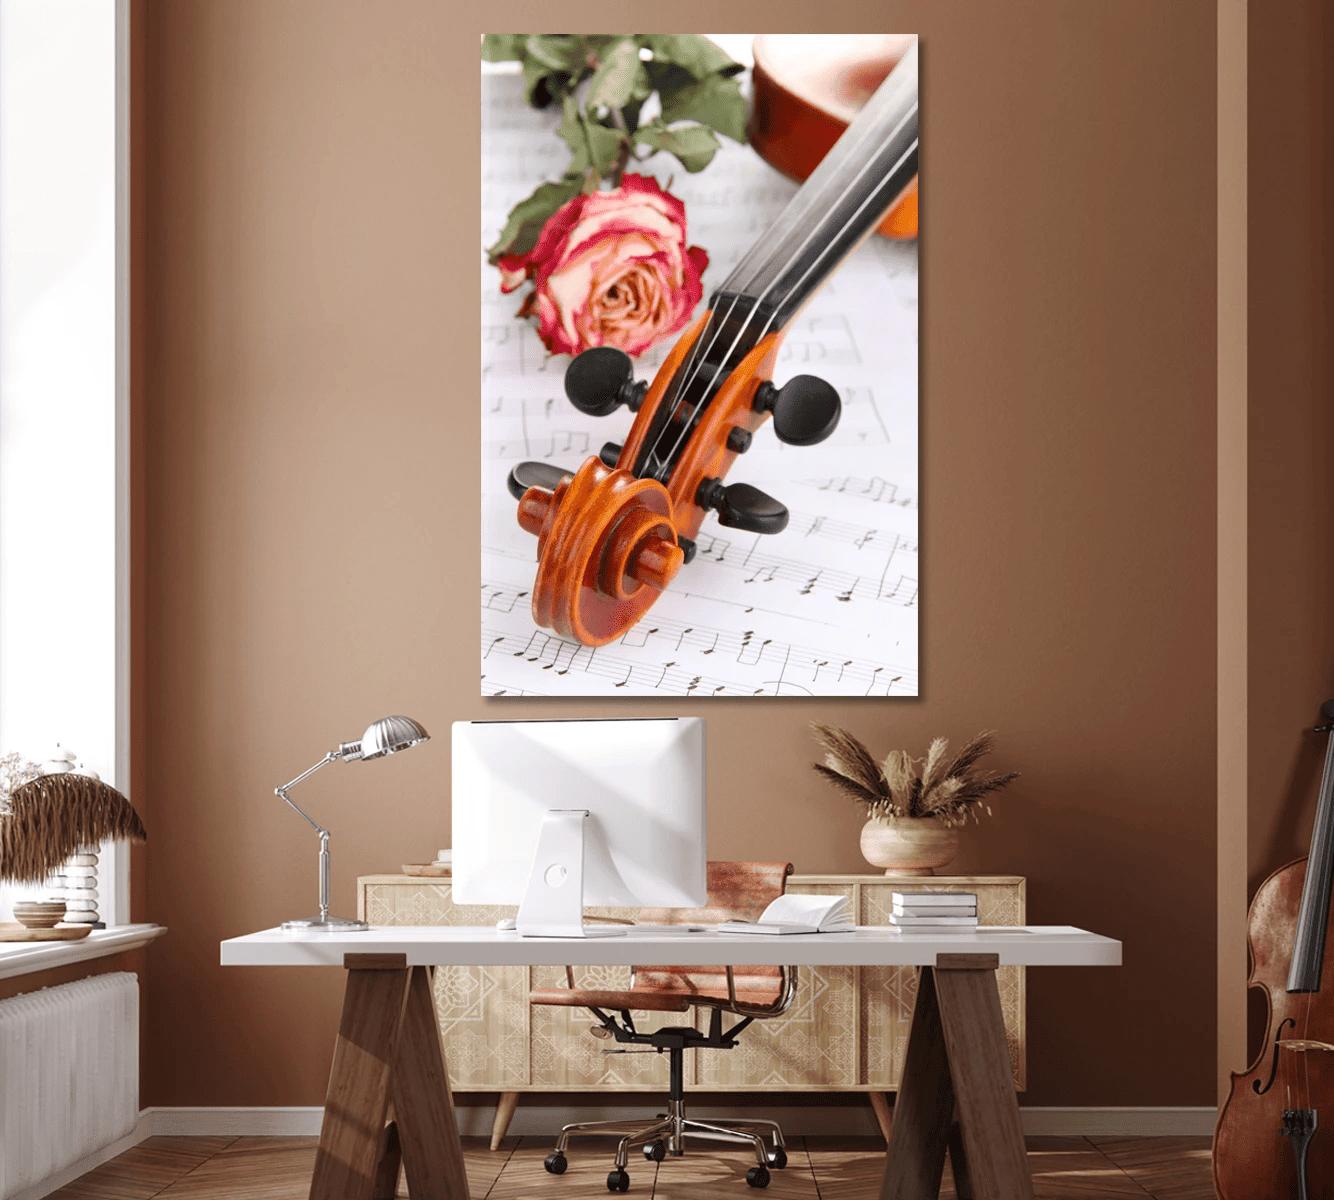 Violin with Dry Rose on Notes Canvas Wall Art Decor